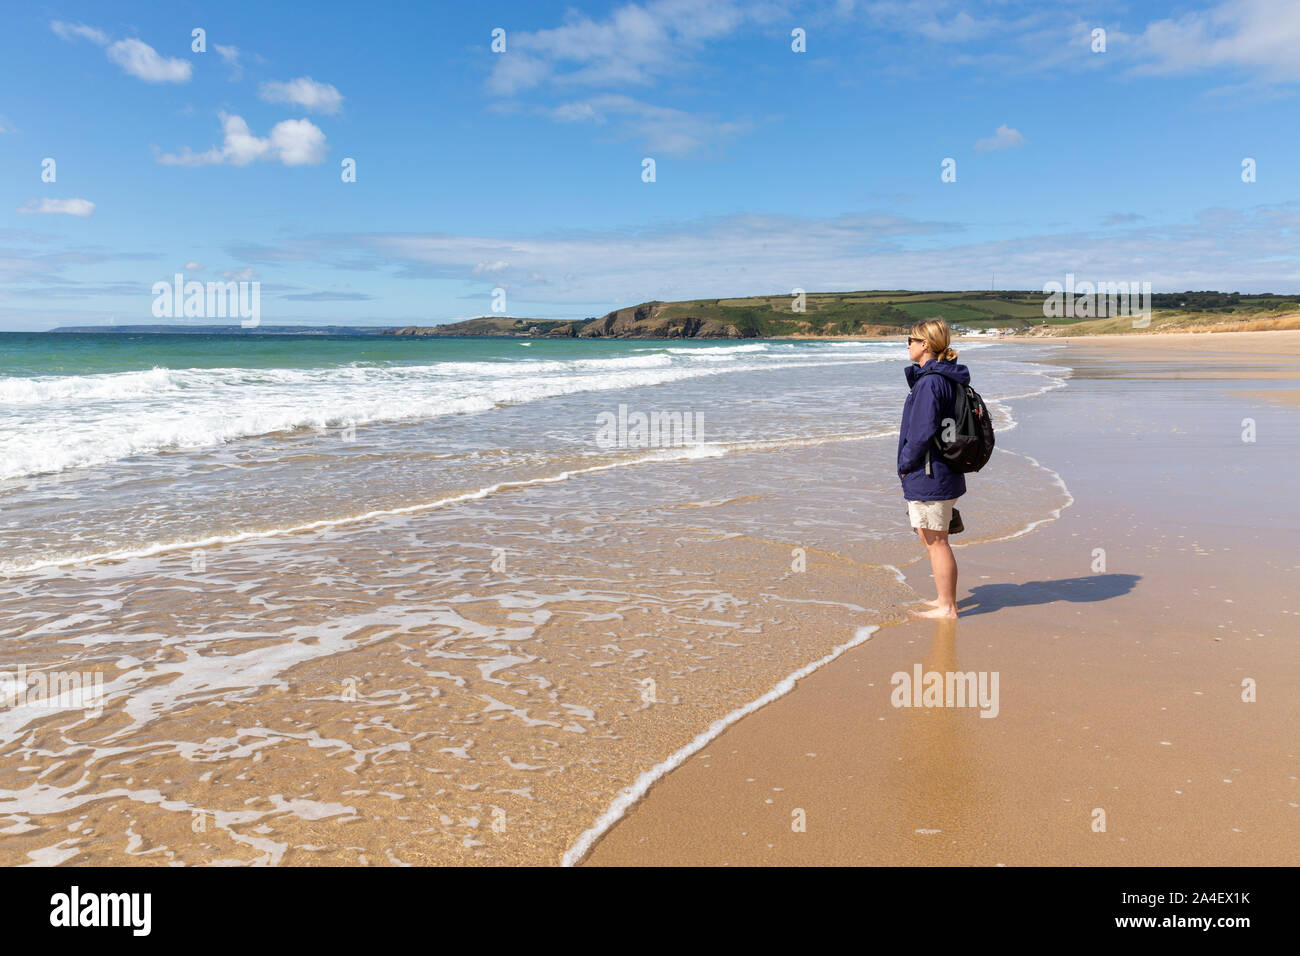 A female walker paddles in the calm surf on the beach at Praa Sands, Cornwall, England, United Kingdom. Stock Photo